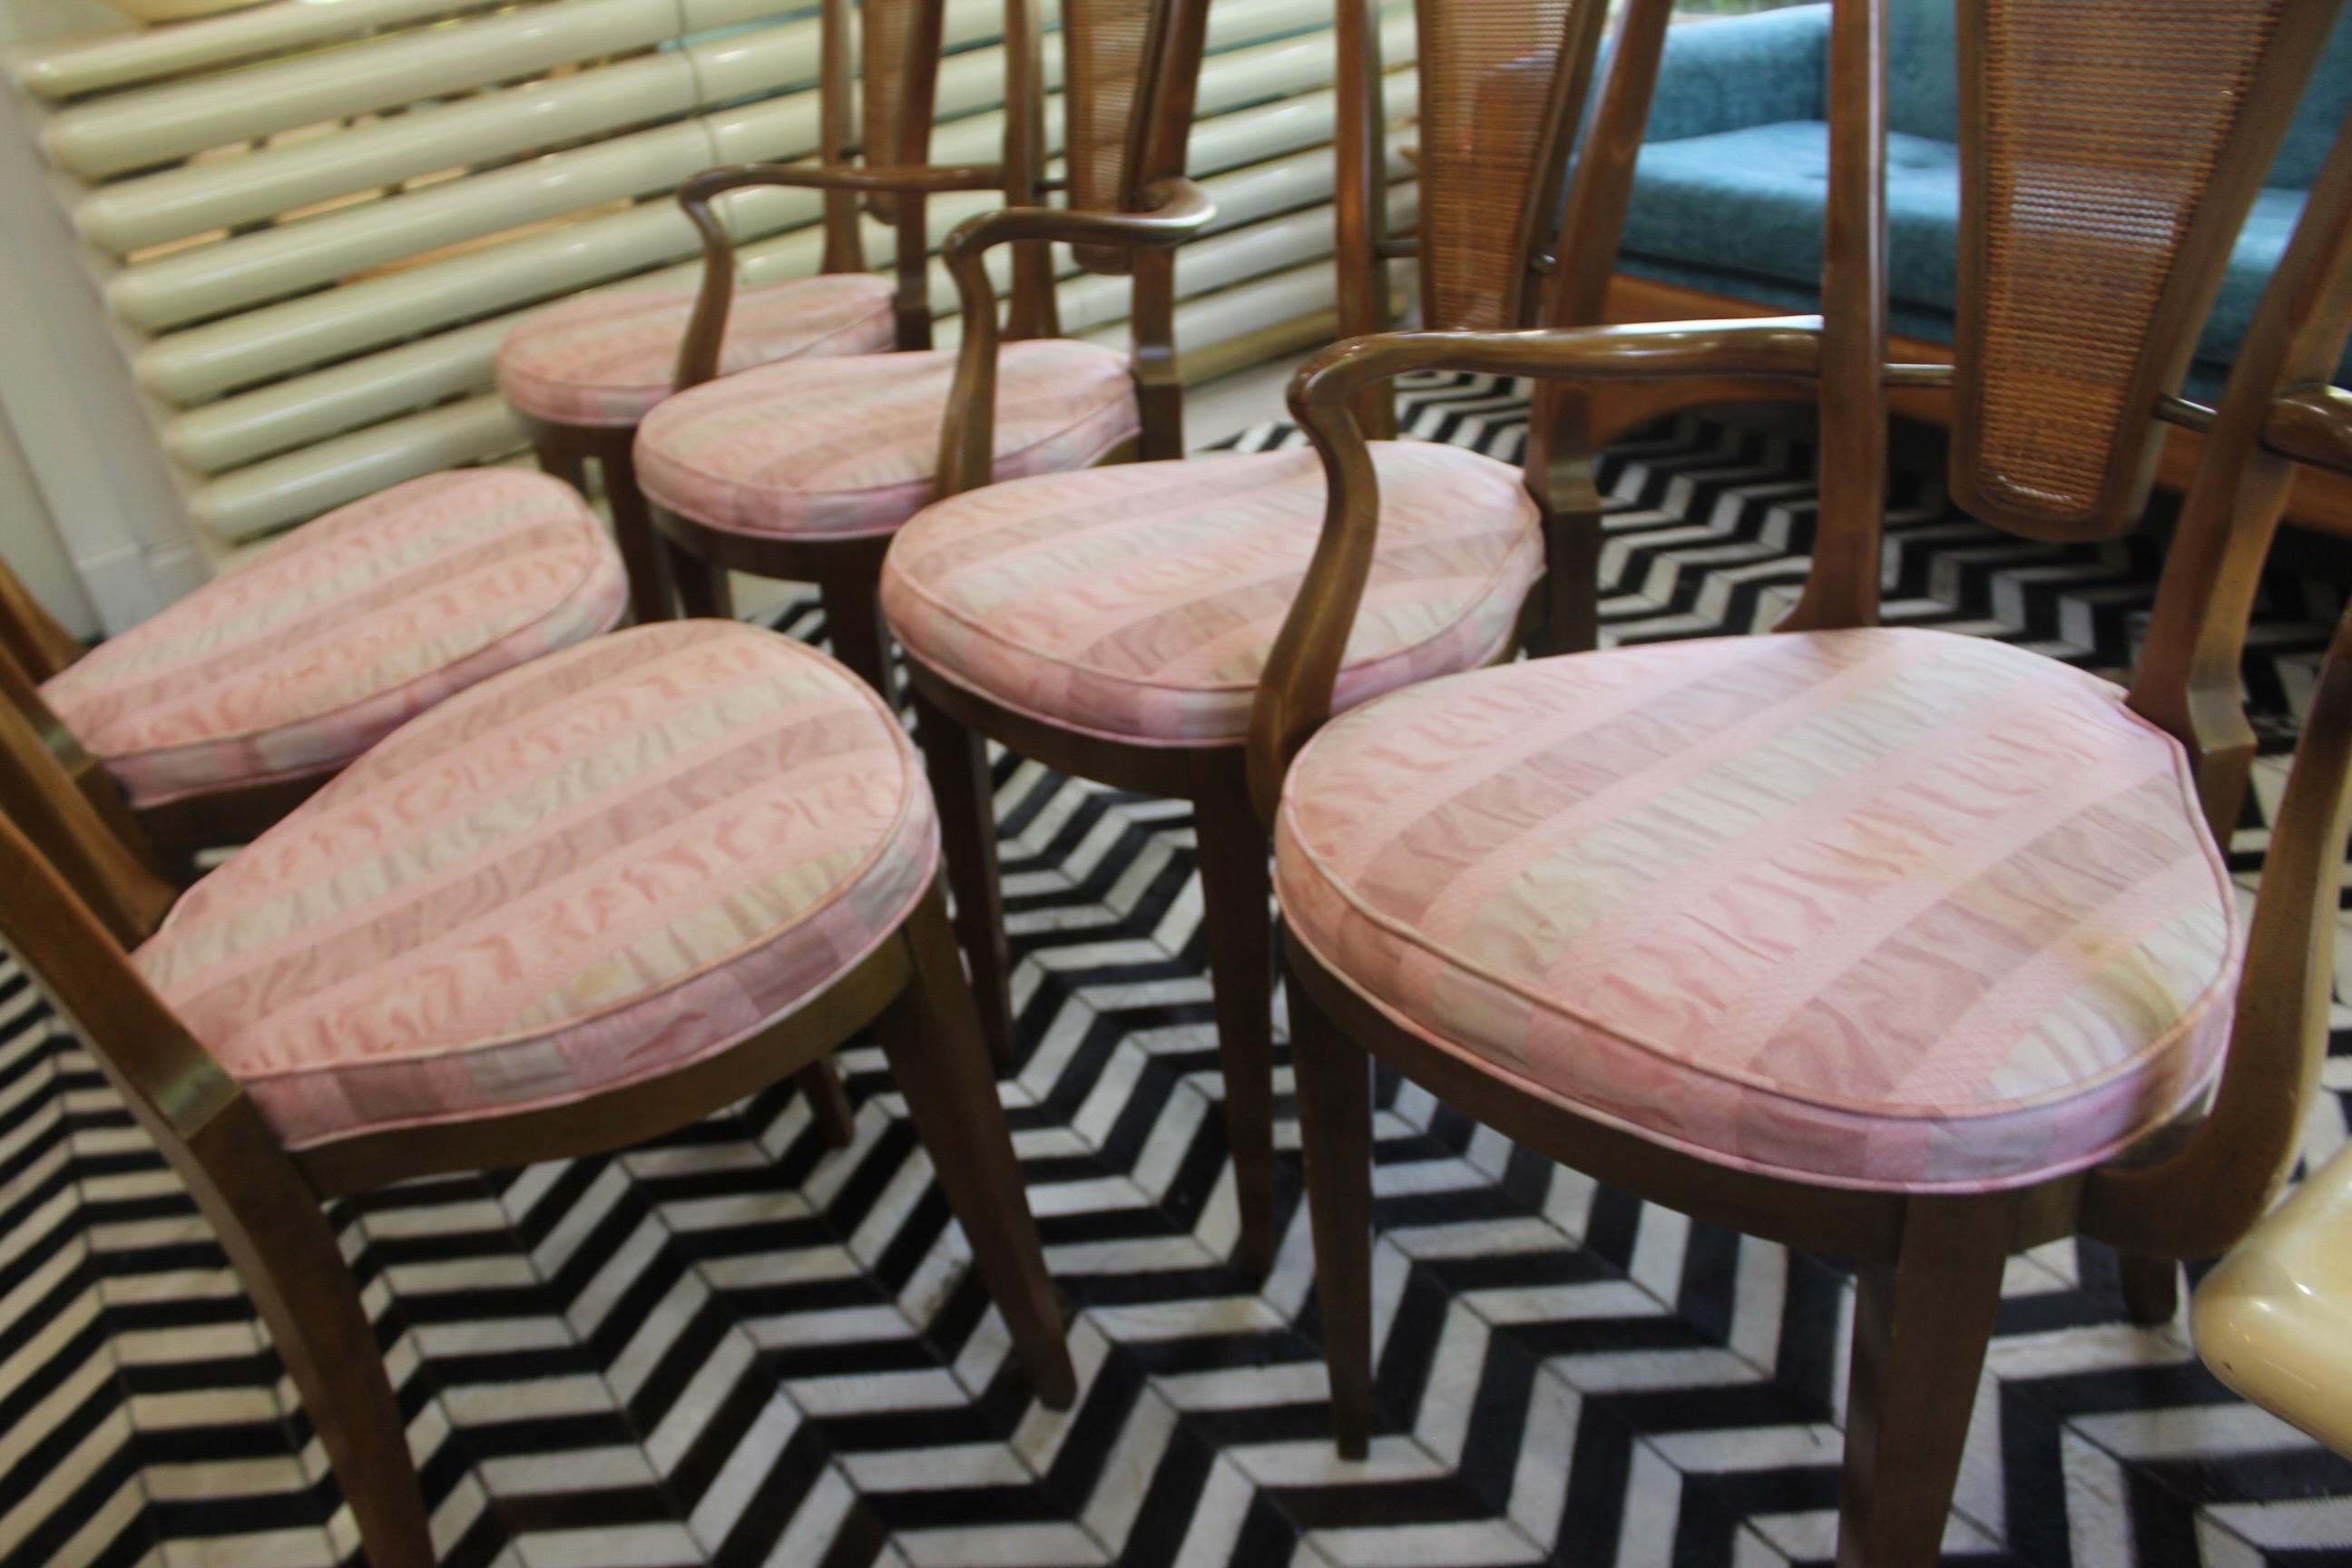 Exquisite vintage Midcentury Modern Romweber Set of 6 Dining Chairs. Features high back cane details with brass accents. Two arm chairs and four armless chairs. Original pink fabric stripped upholstery in good vintage condition. No rips or stains.